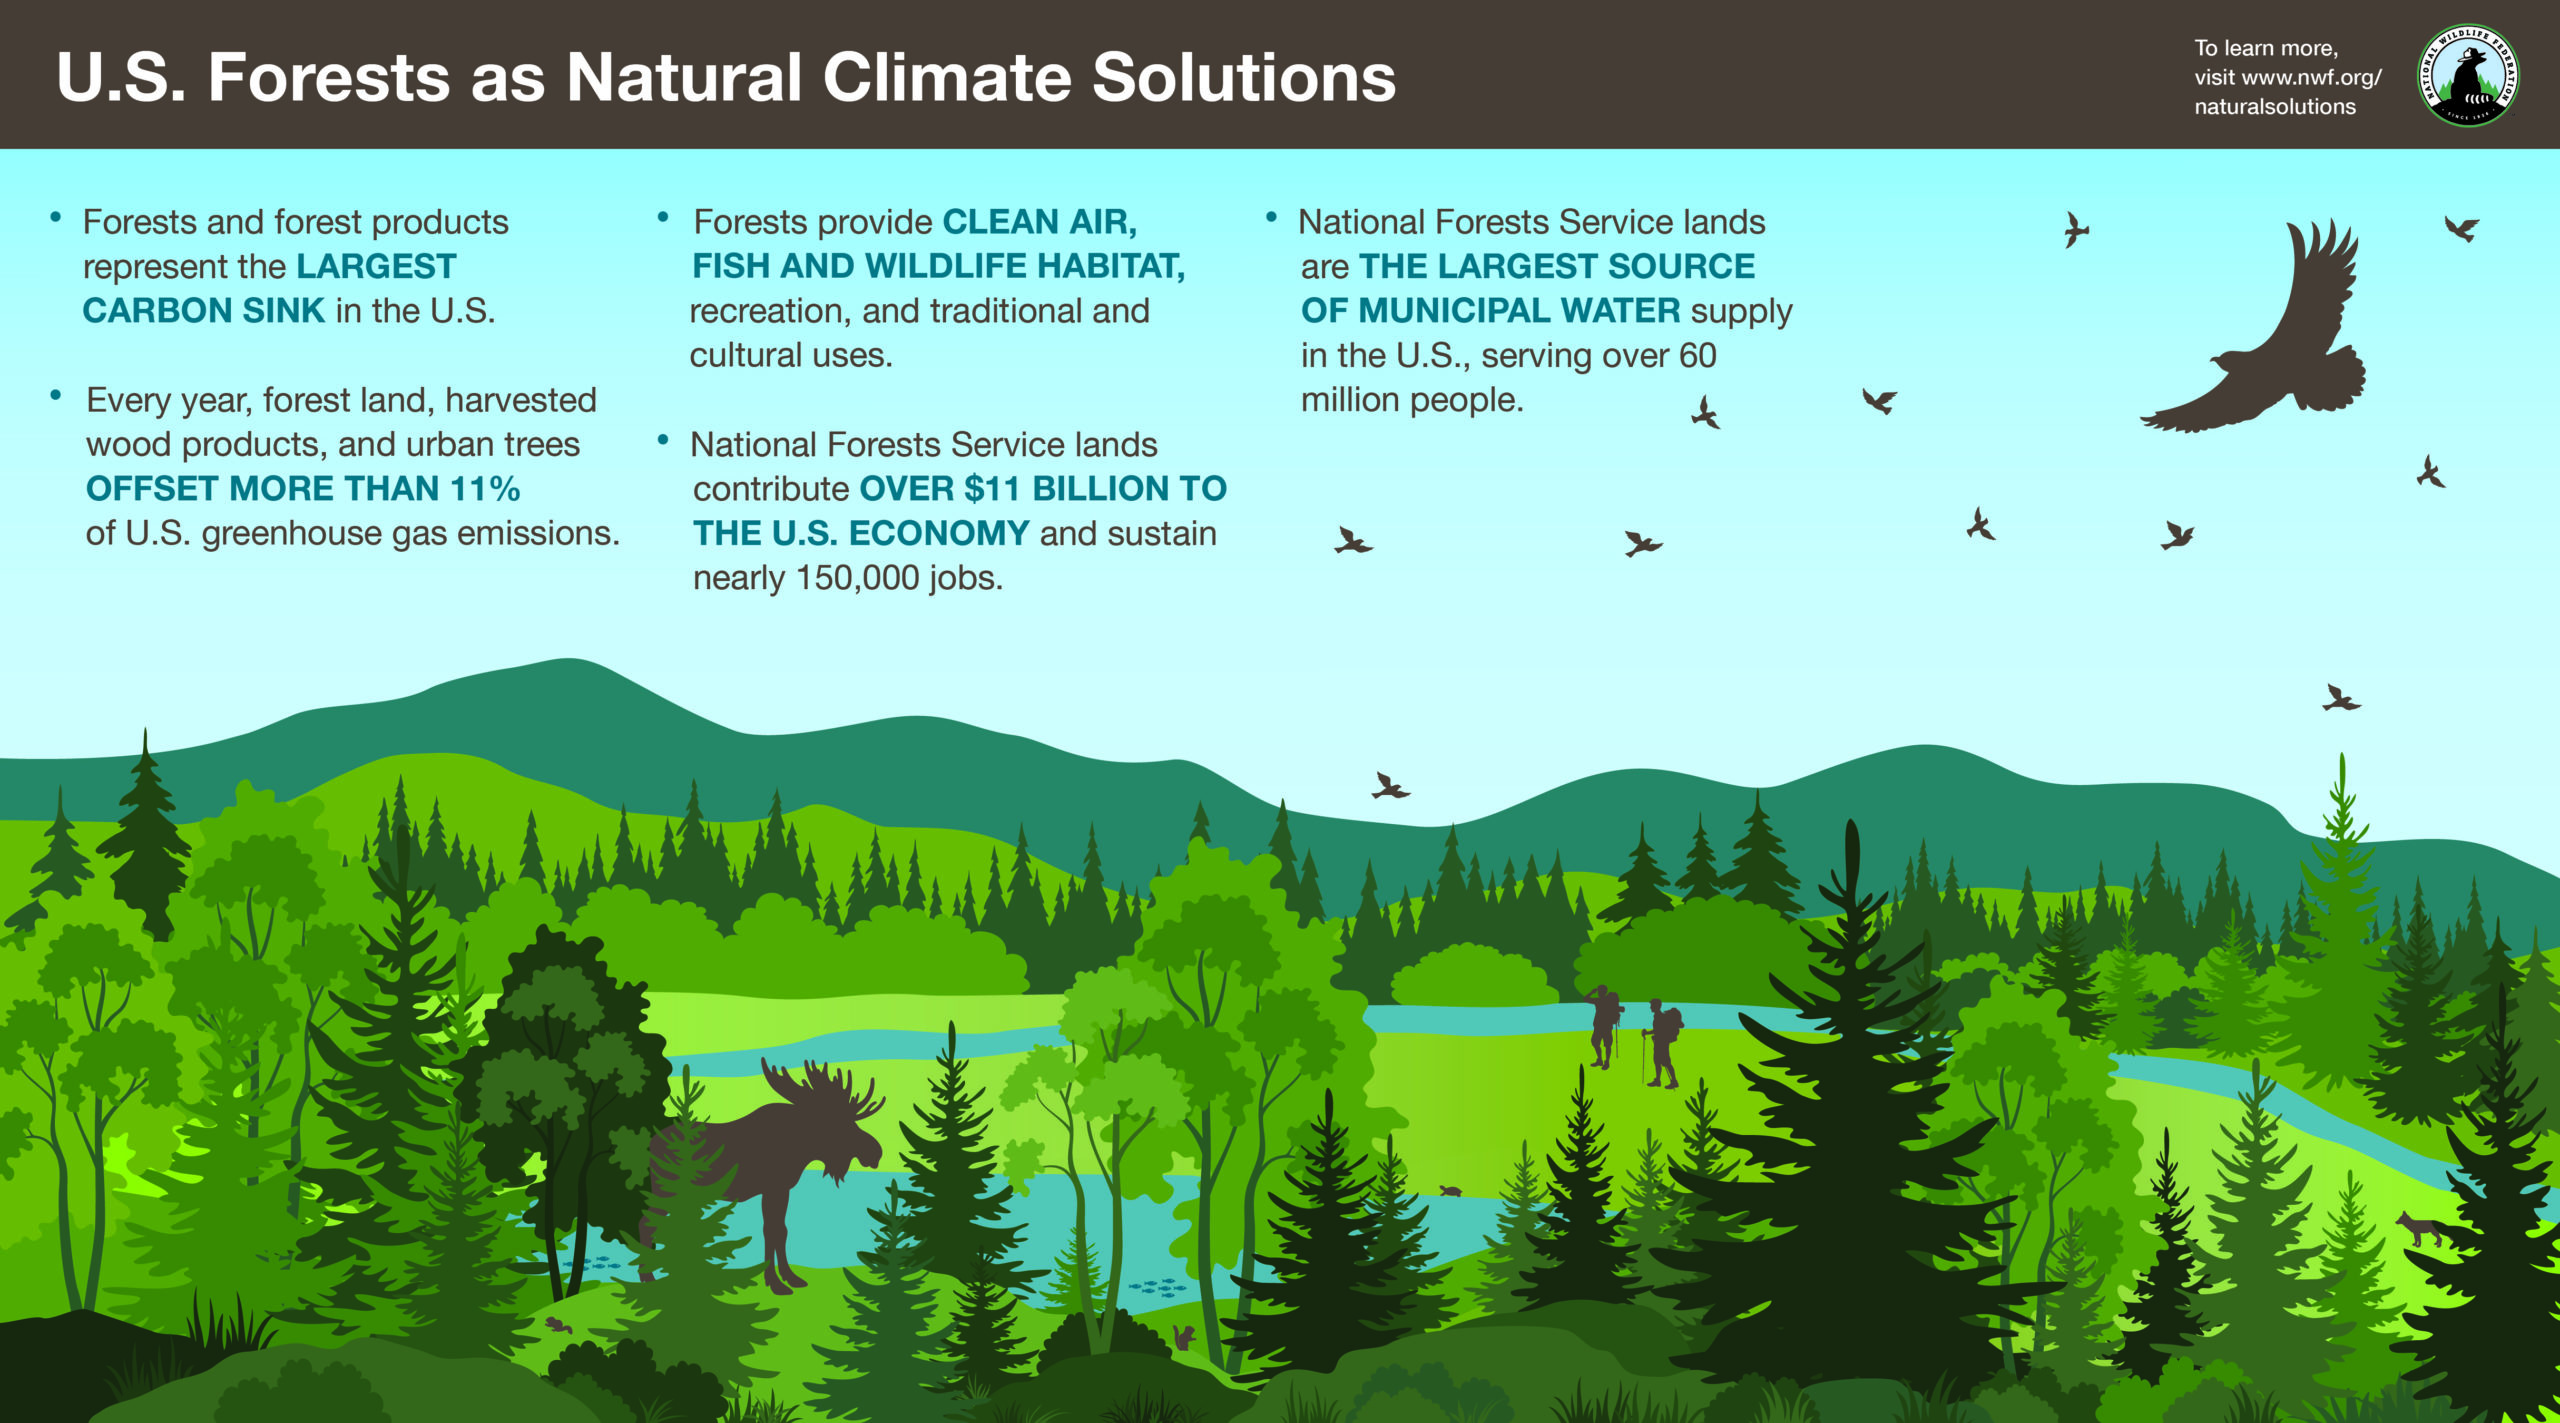 U.S. Forests as Natural Climate Solutions infographic